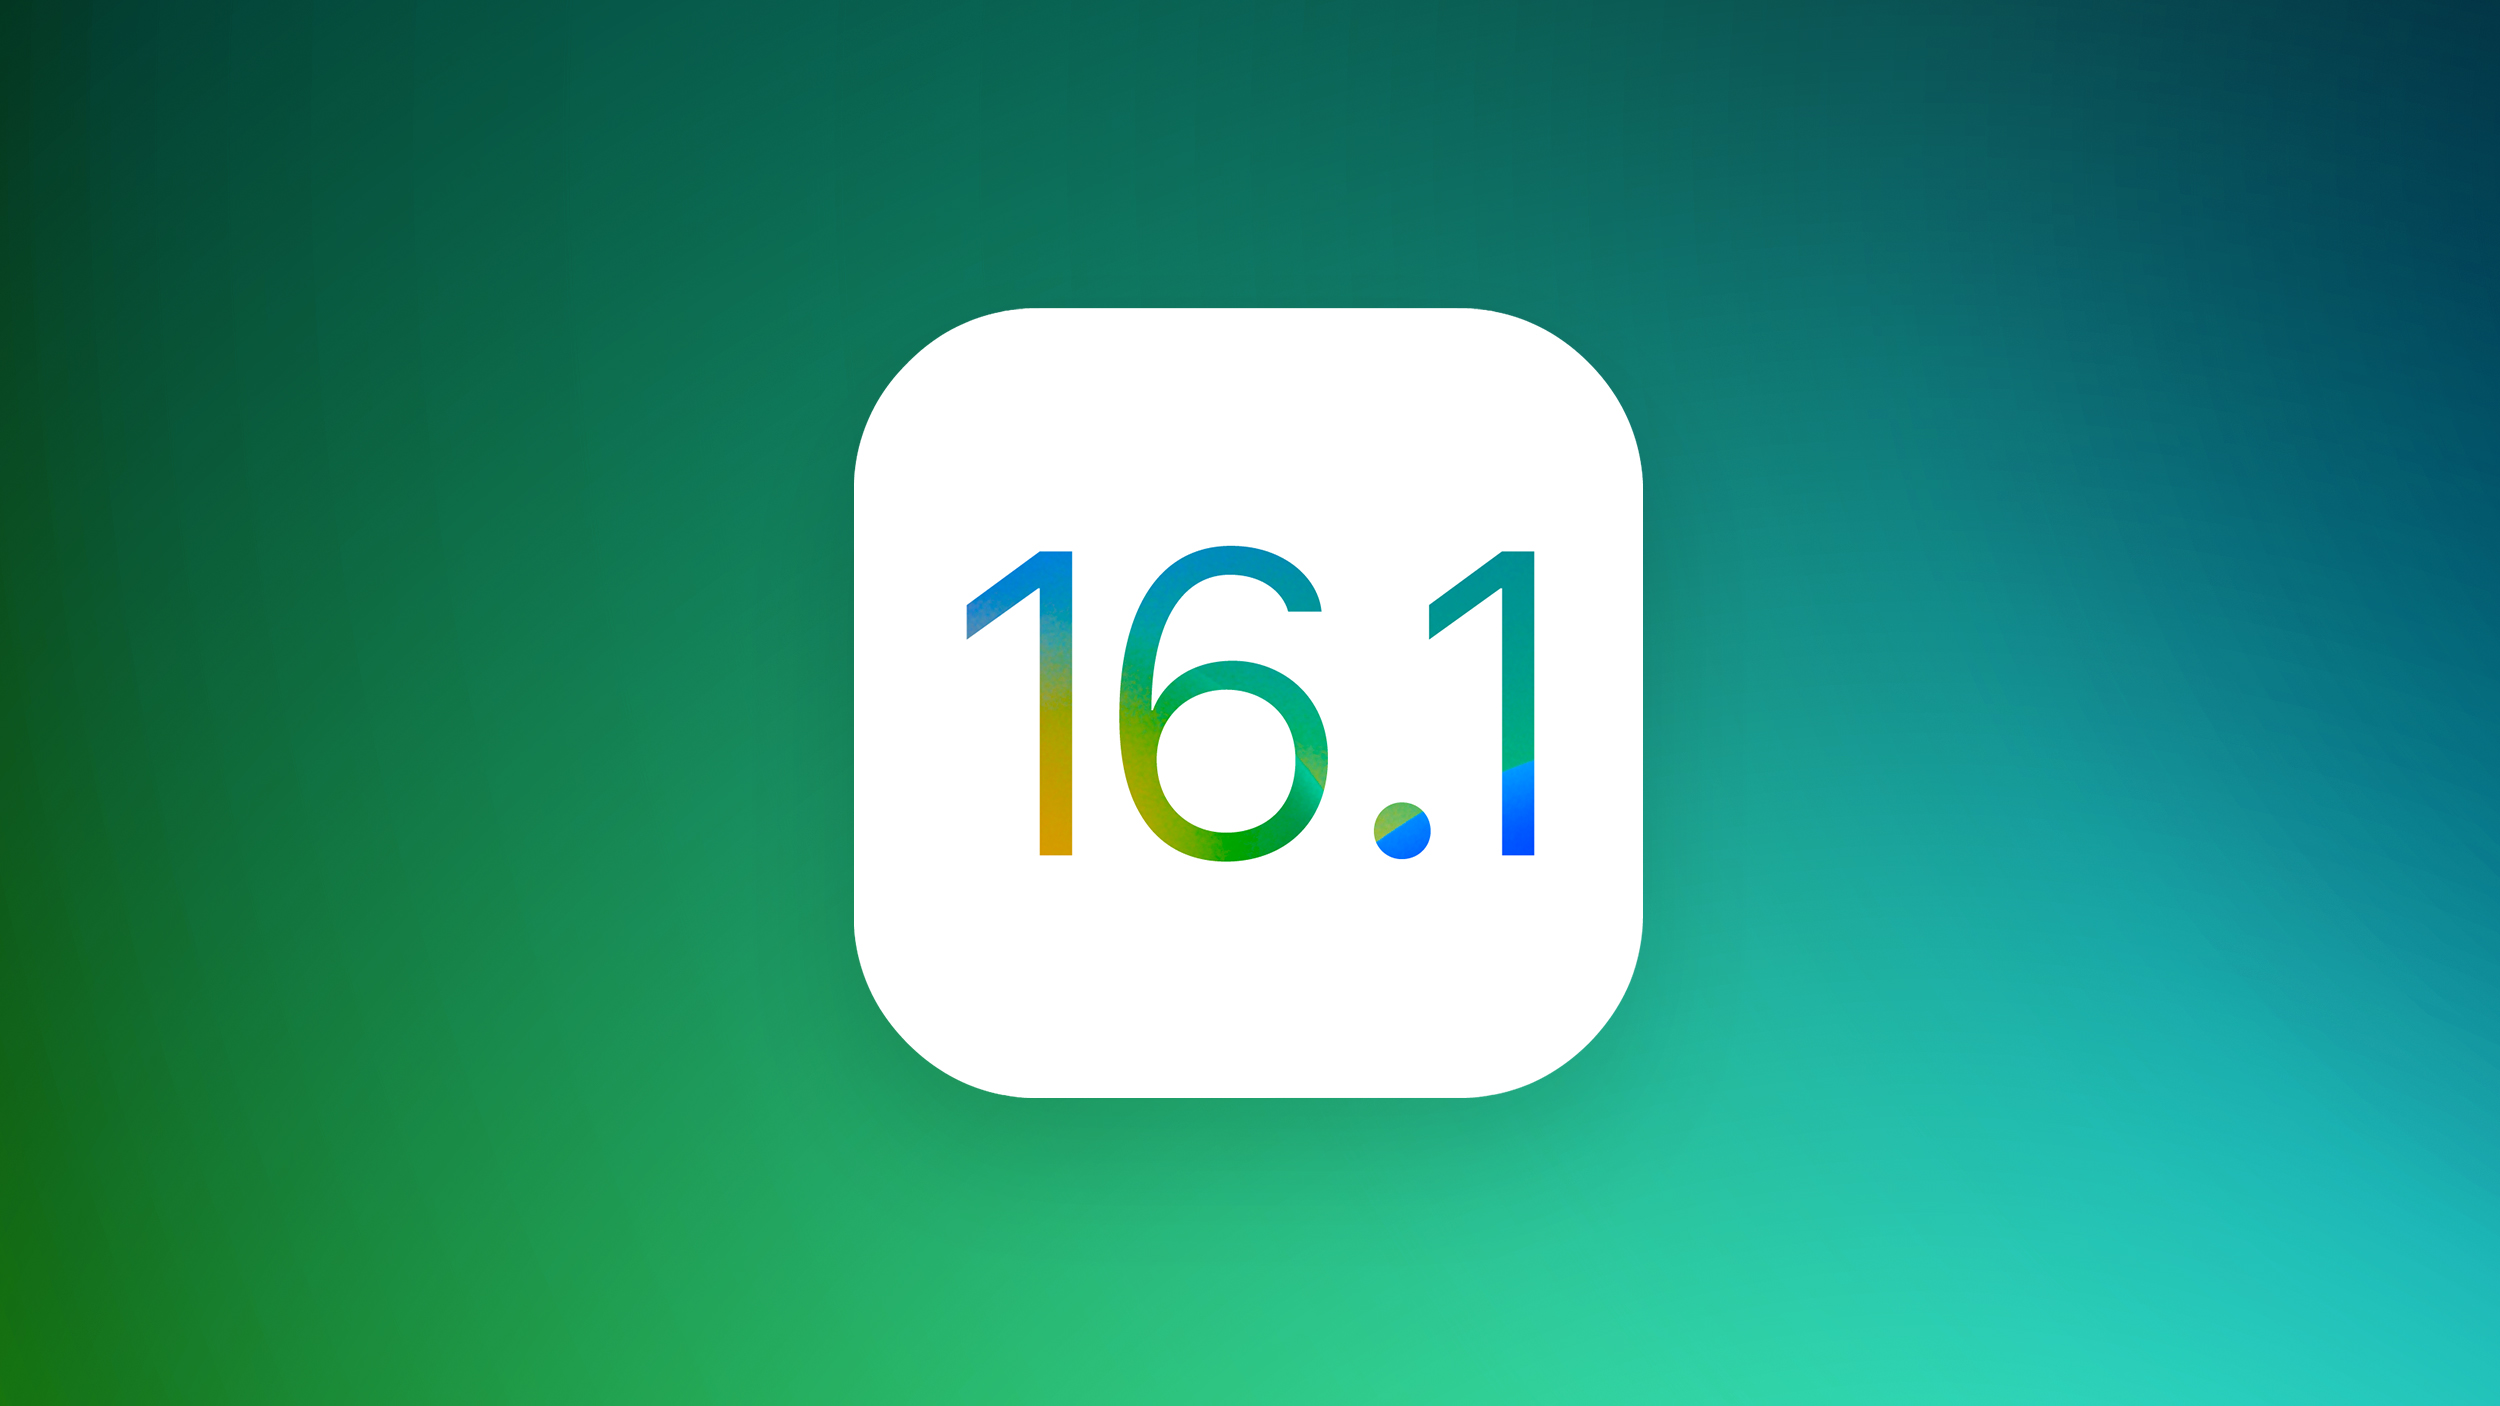 Apple Releases First Beta of iOS 16.1 to Developers